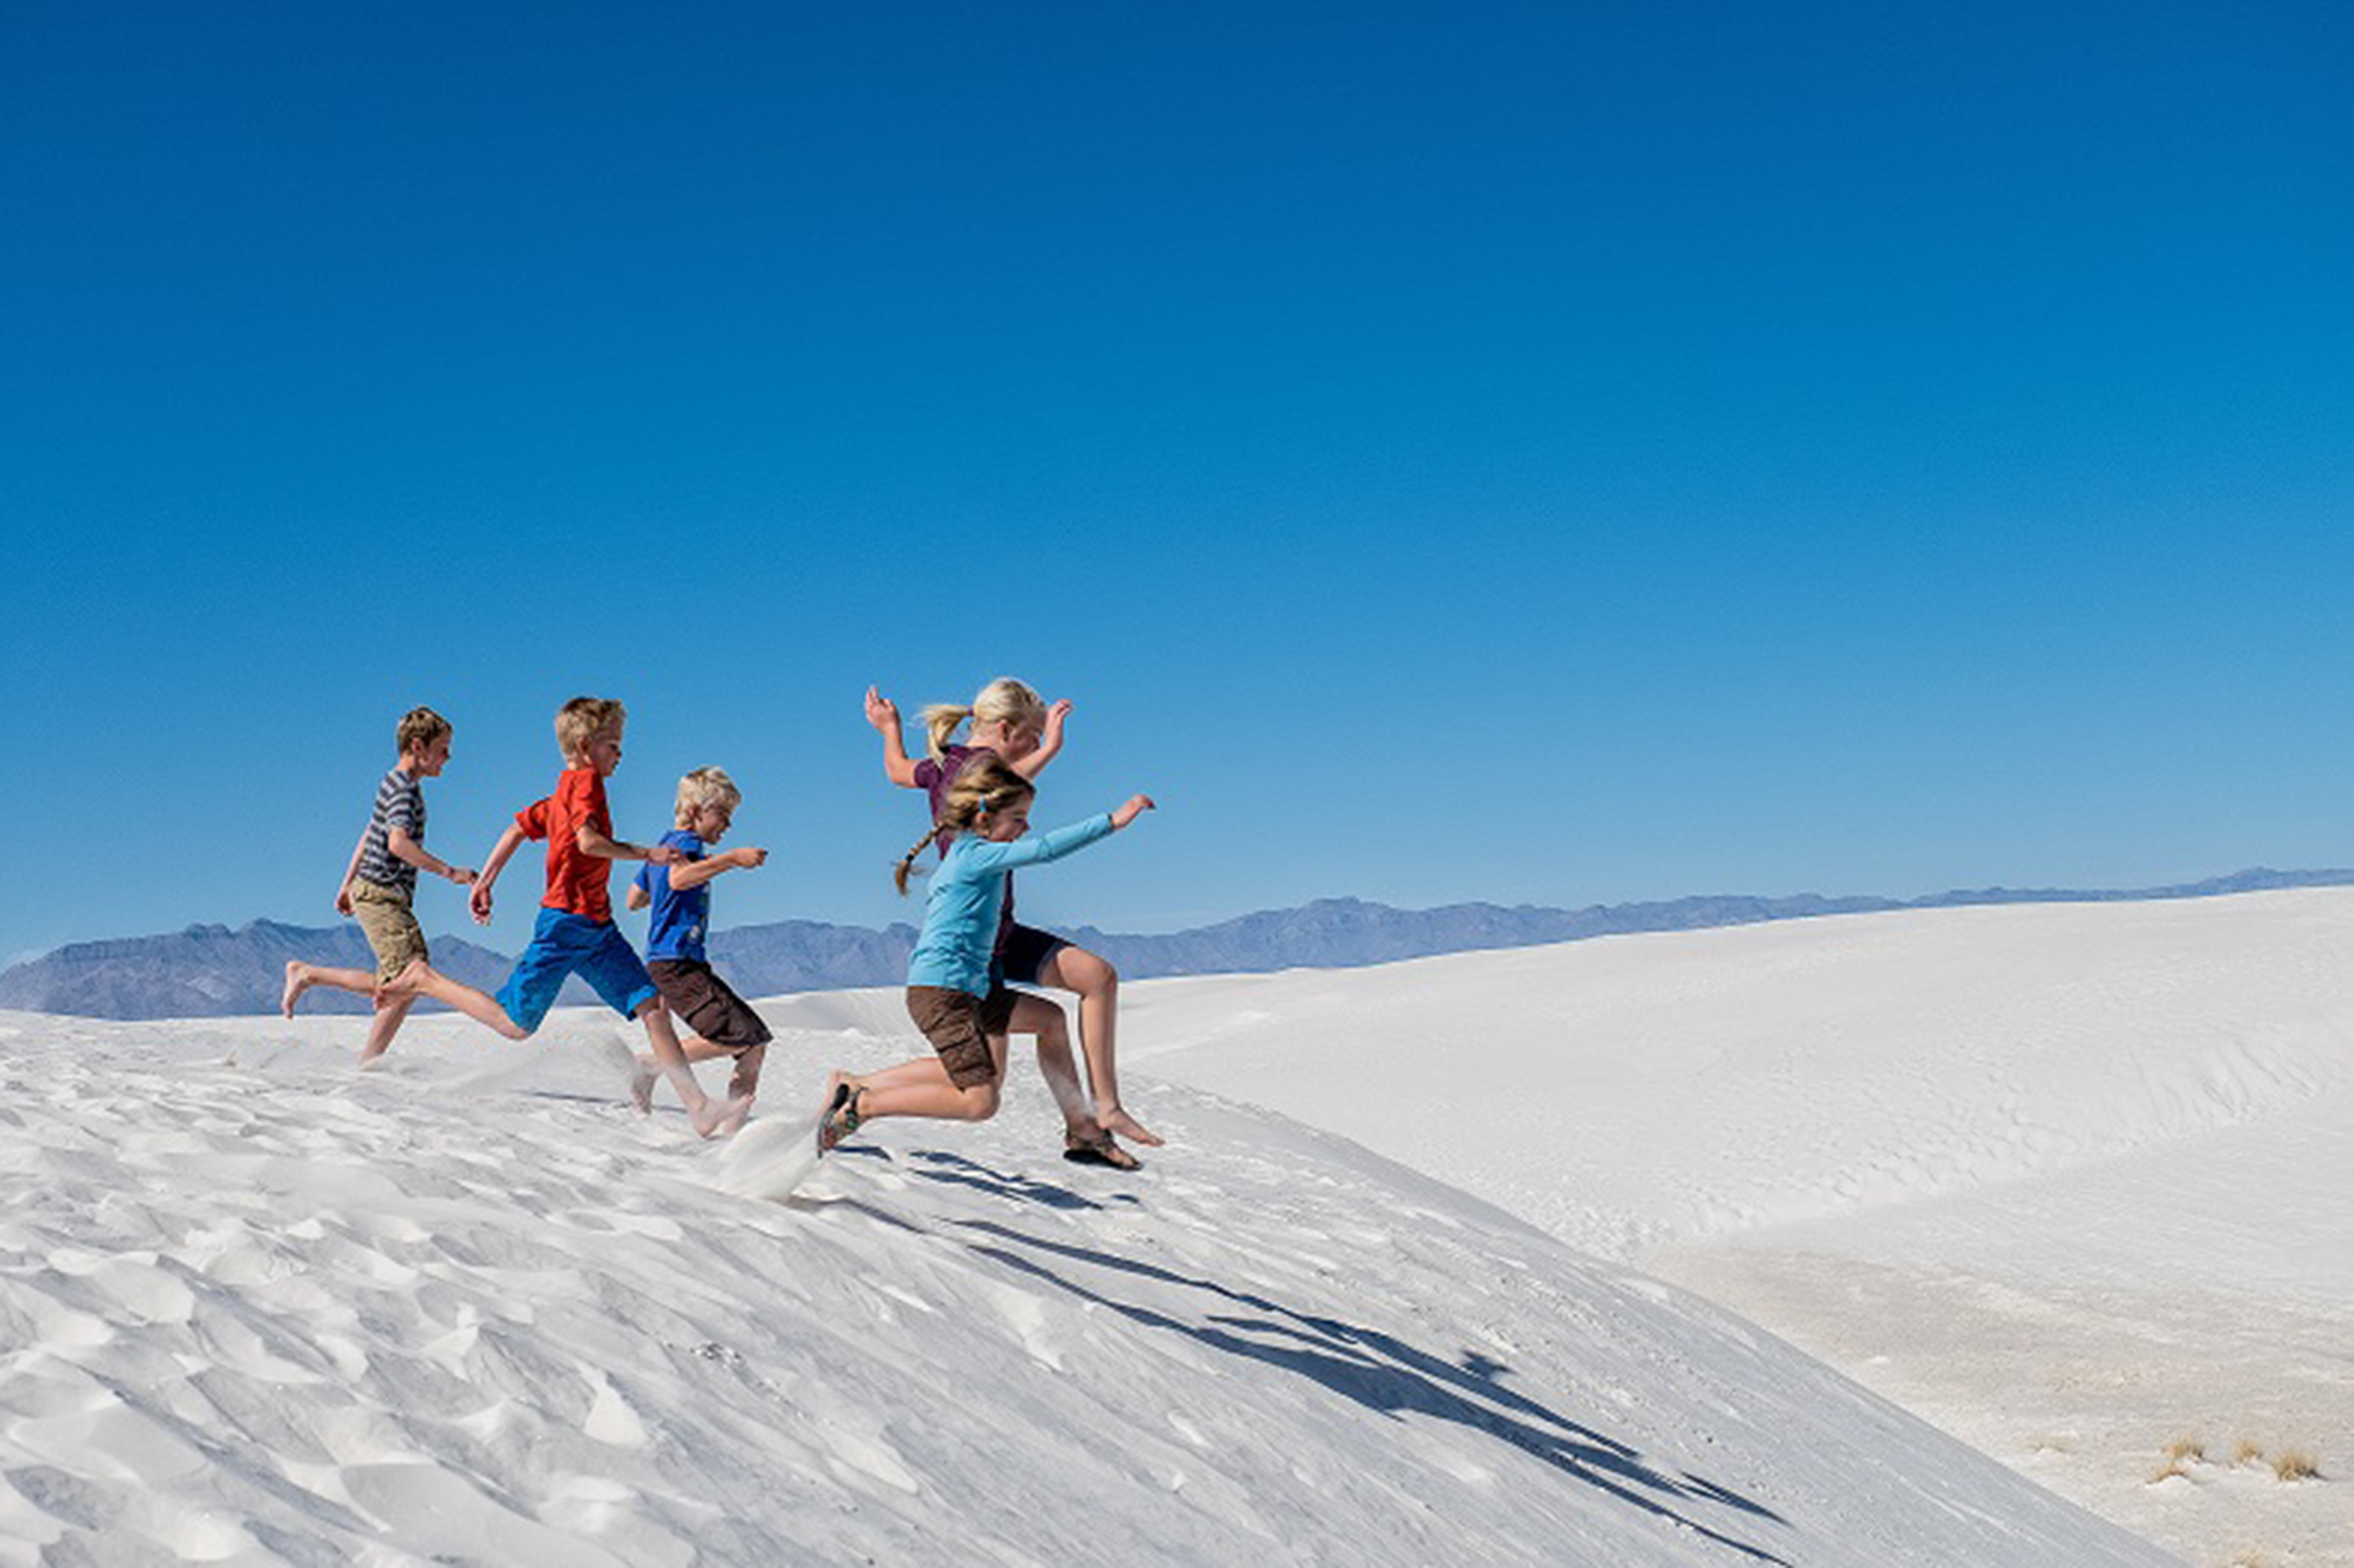 Share the Experience photo contest, White Sands National Monument in New Mexico/Jess Curren